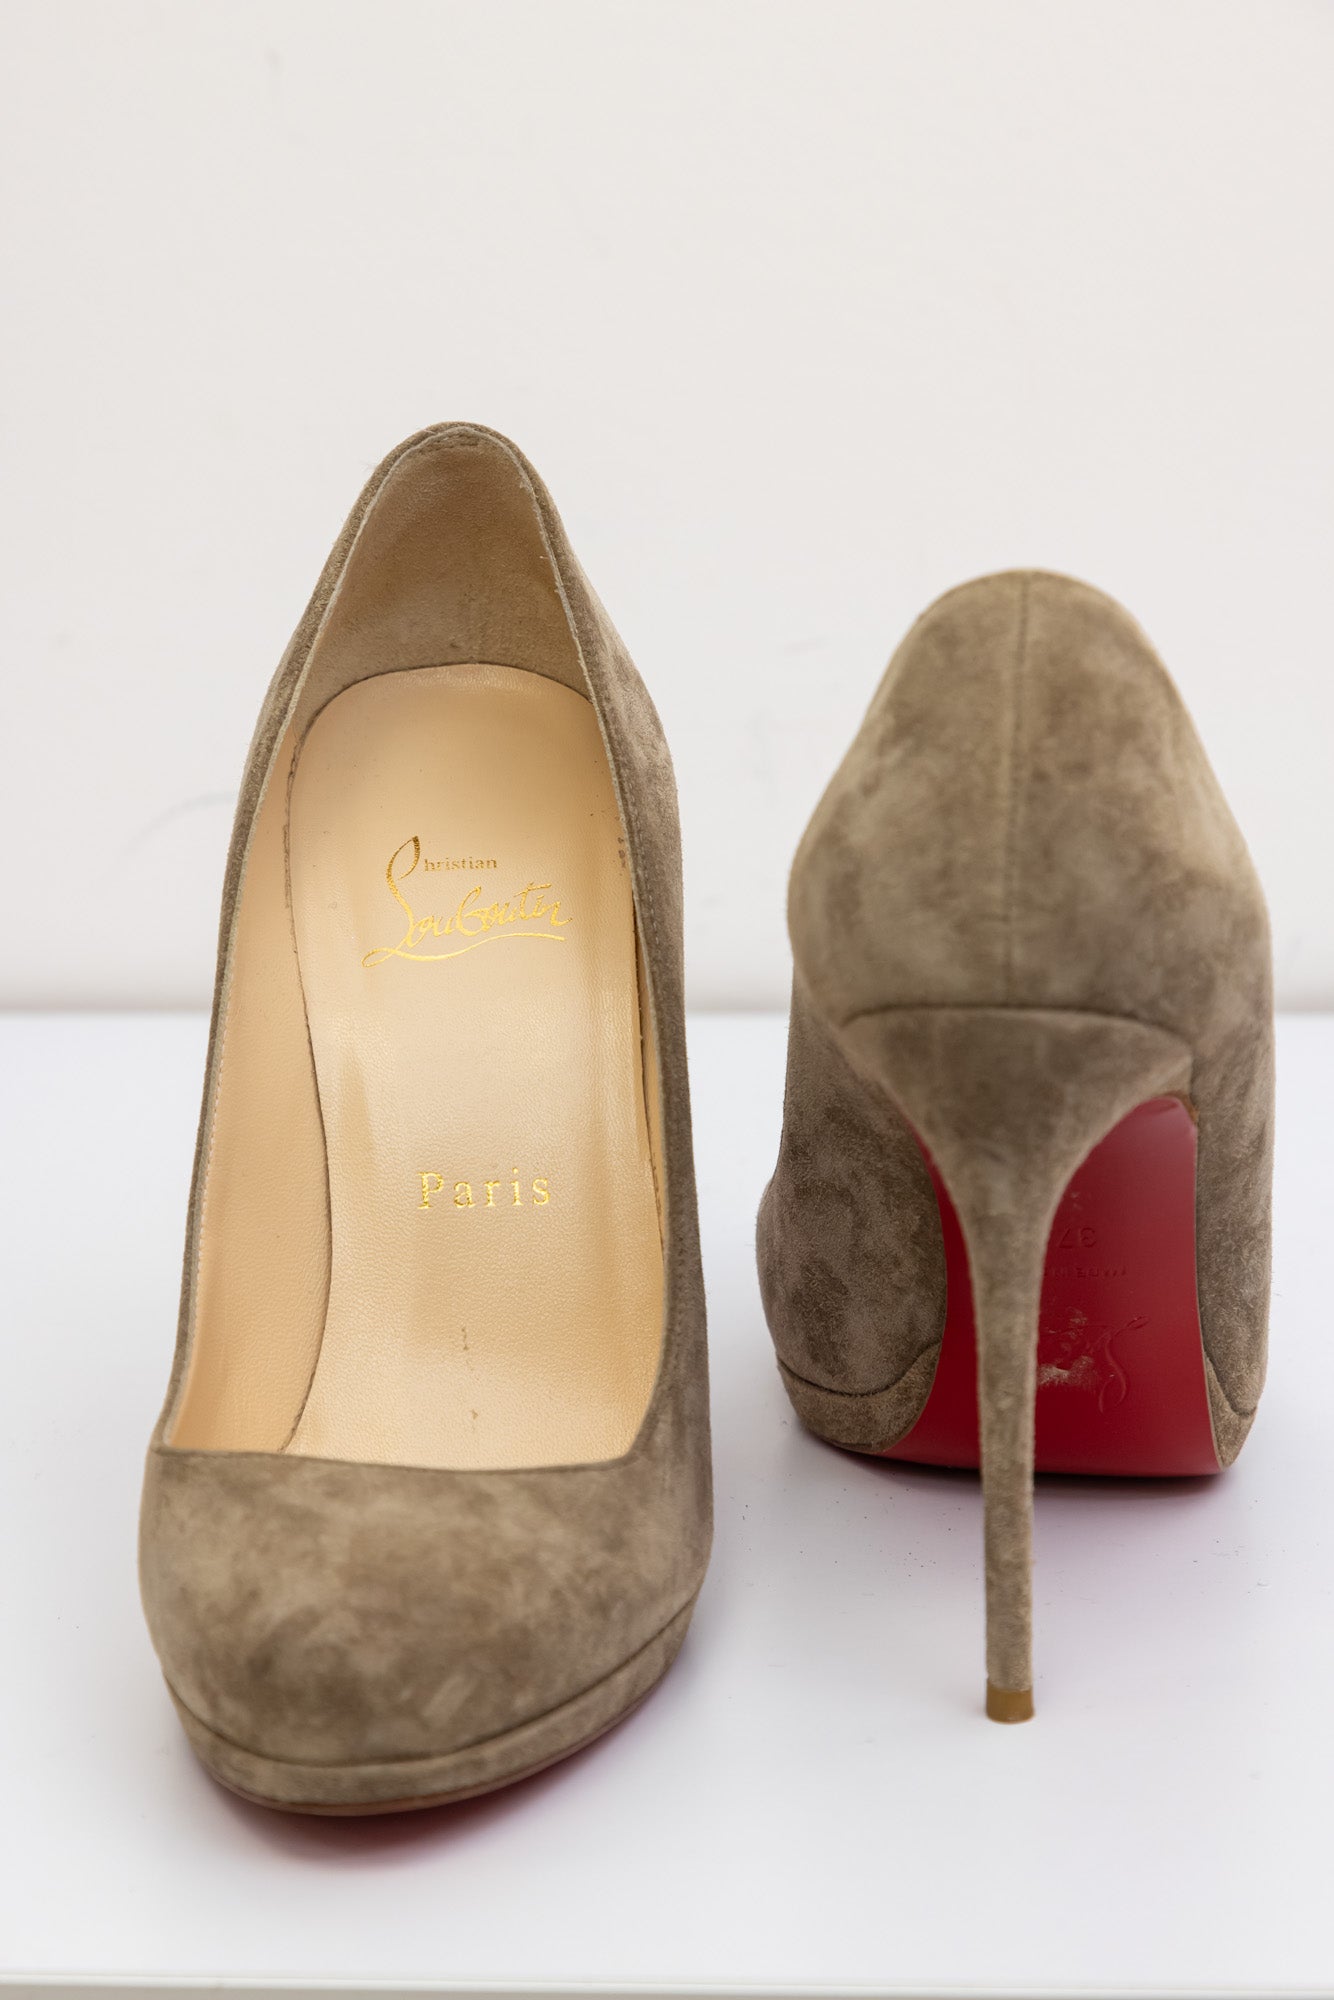 CHRISTIAN LOUBOUTIN Grey Suede Red Bottom Round Toe Pump Heels 